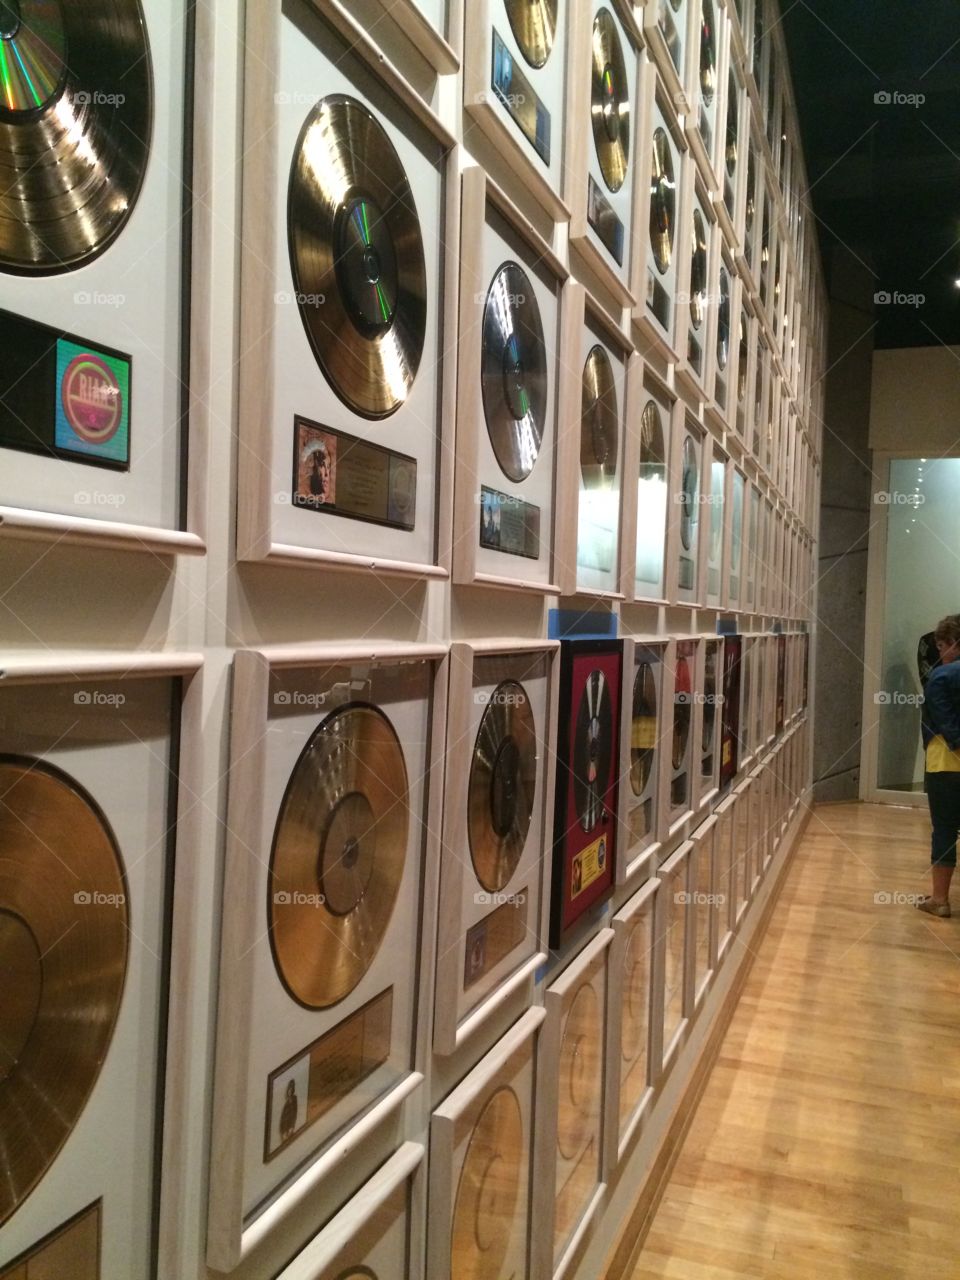 Country Music Hall of Fame, Nashville